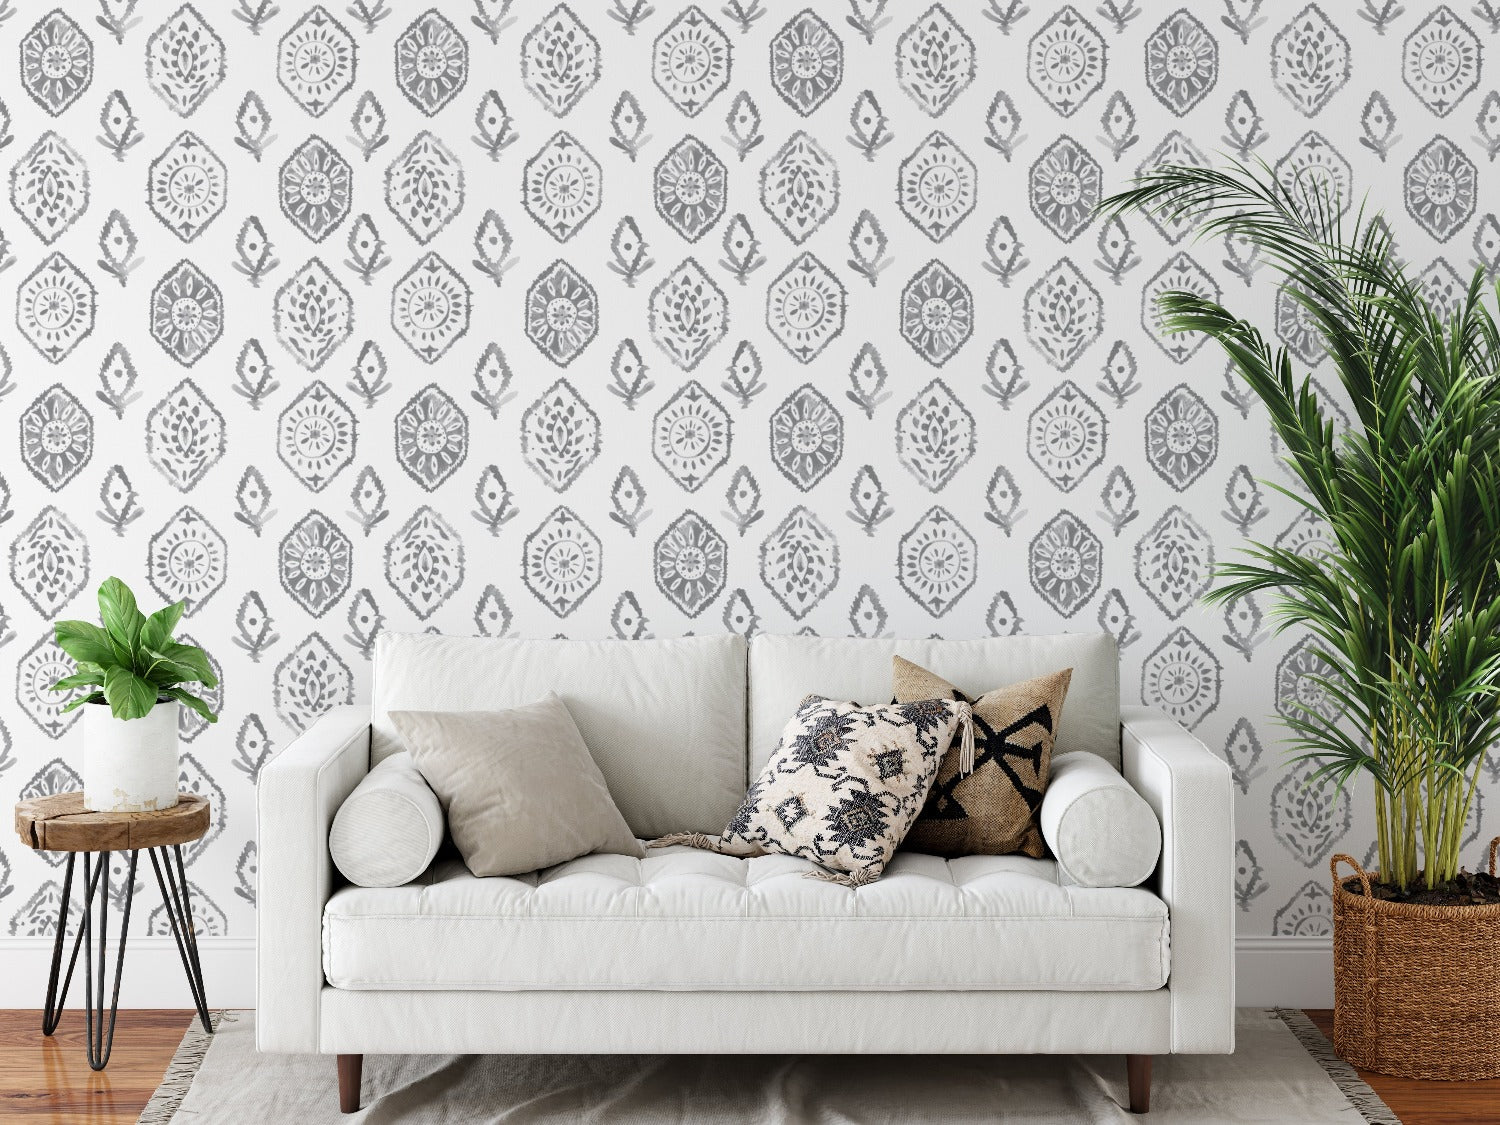 A stylish living room with one wall adorned with the Moroccan Tile Wallpaper IX, complementing the contemporary decor including a white couch with patterned cushions, a tall indoor plant, and elegant drapery.